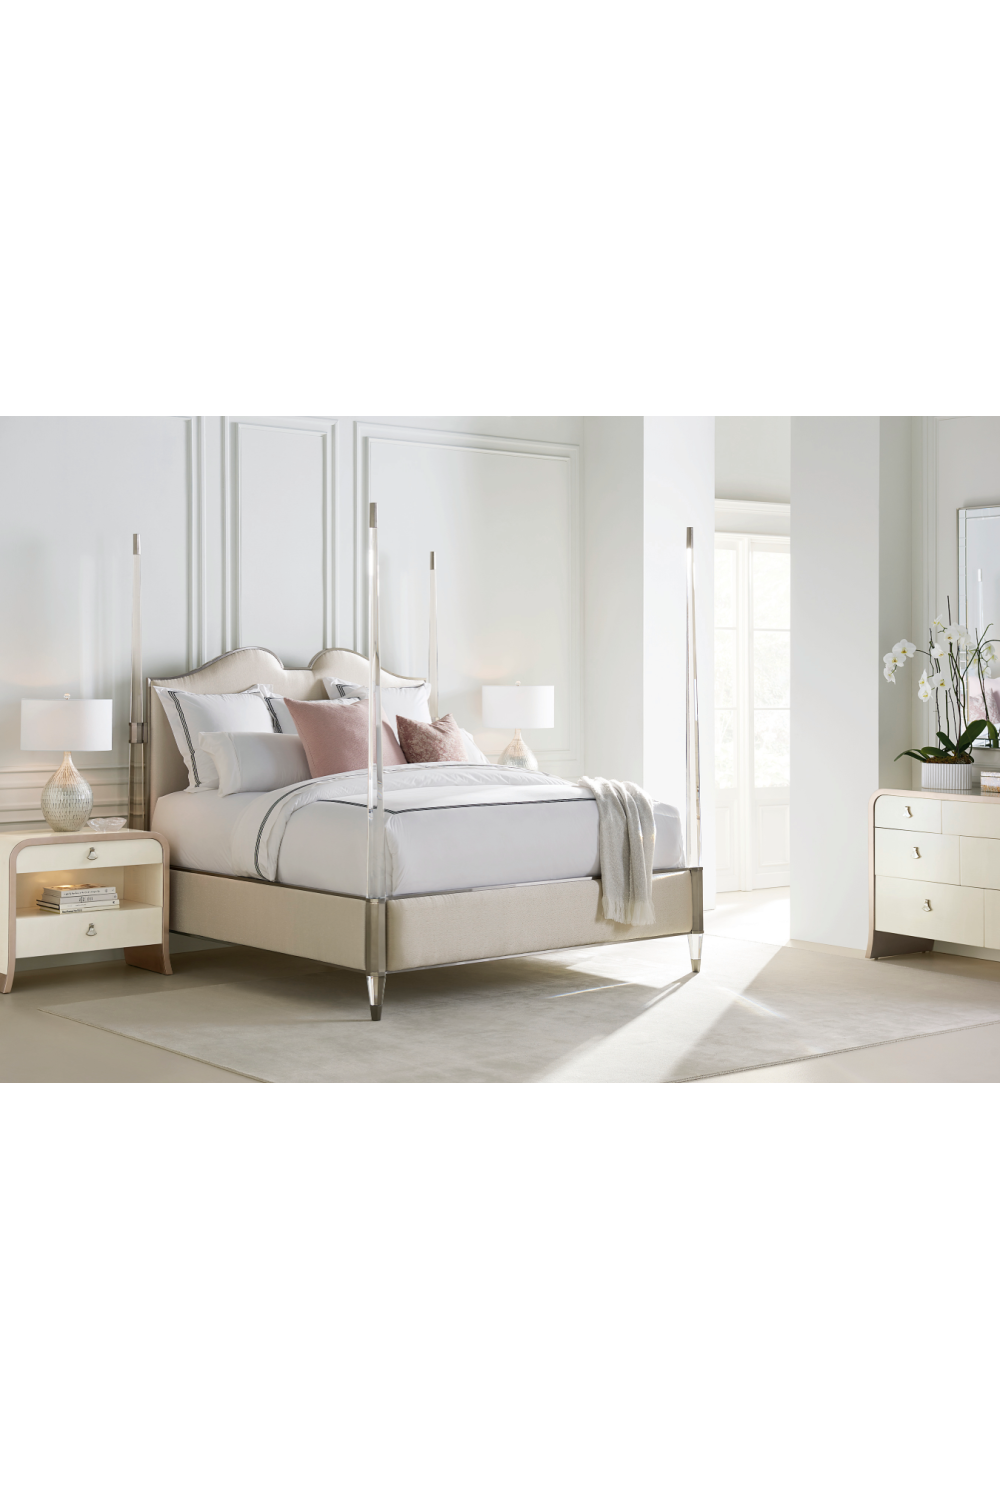 Cream Modern Classic Bed | Caracole The Post Is Clear | Oroa.com